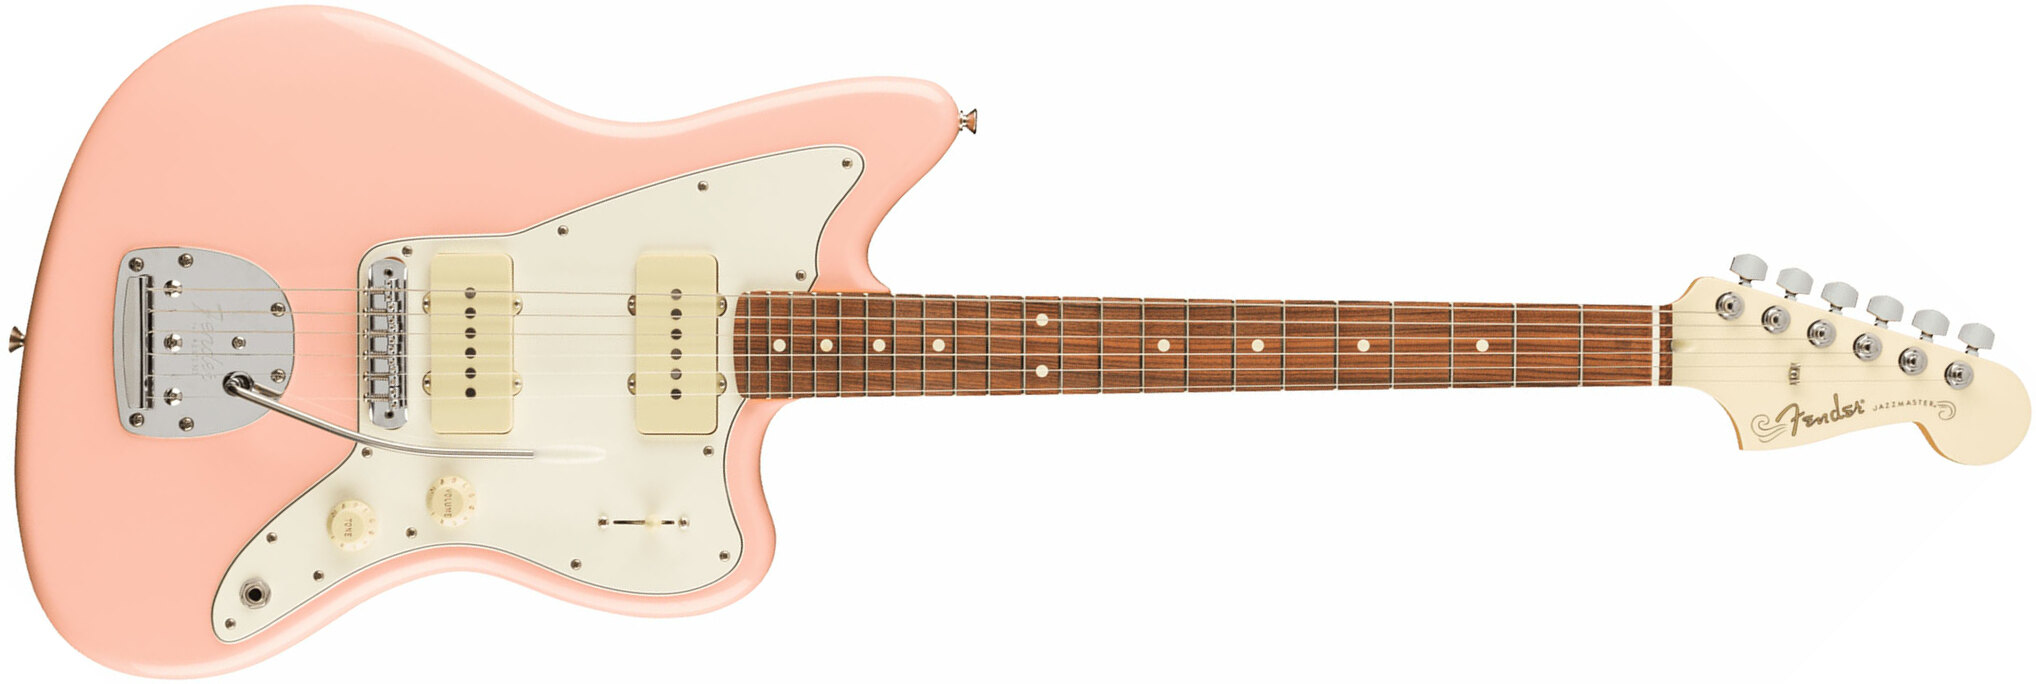 Fender Jazzmaster Player Ltd Mex 2s Trem Pf - Shell Pink - Retro rock electric guitar - Main picture